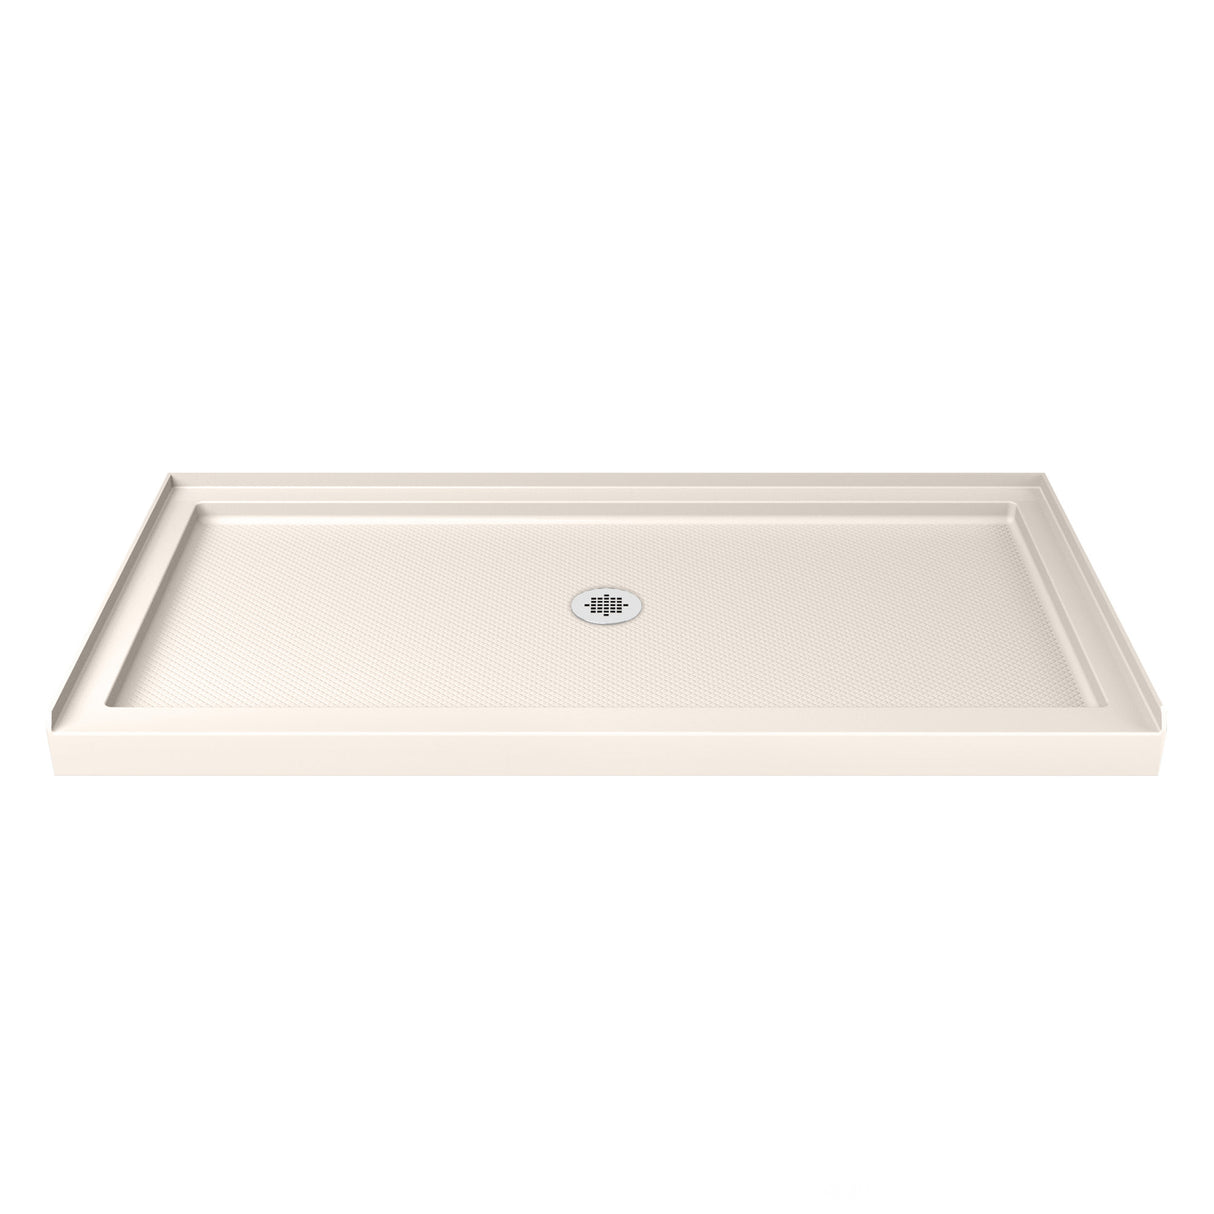 DreamLine Encore 34 in. D x 60 in. W x 78 3/4 in. H Bypass Shower Door in Brushed Nickel and Center Drain Biscuit Base Kit